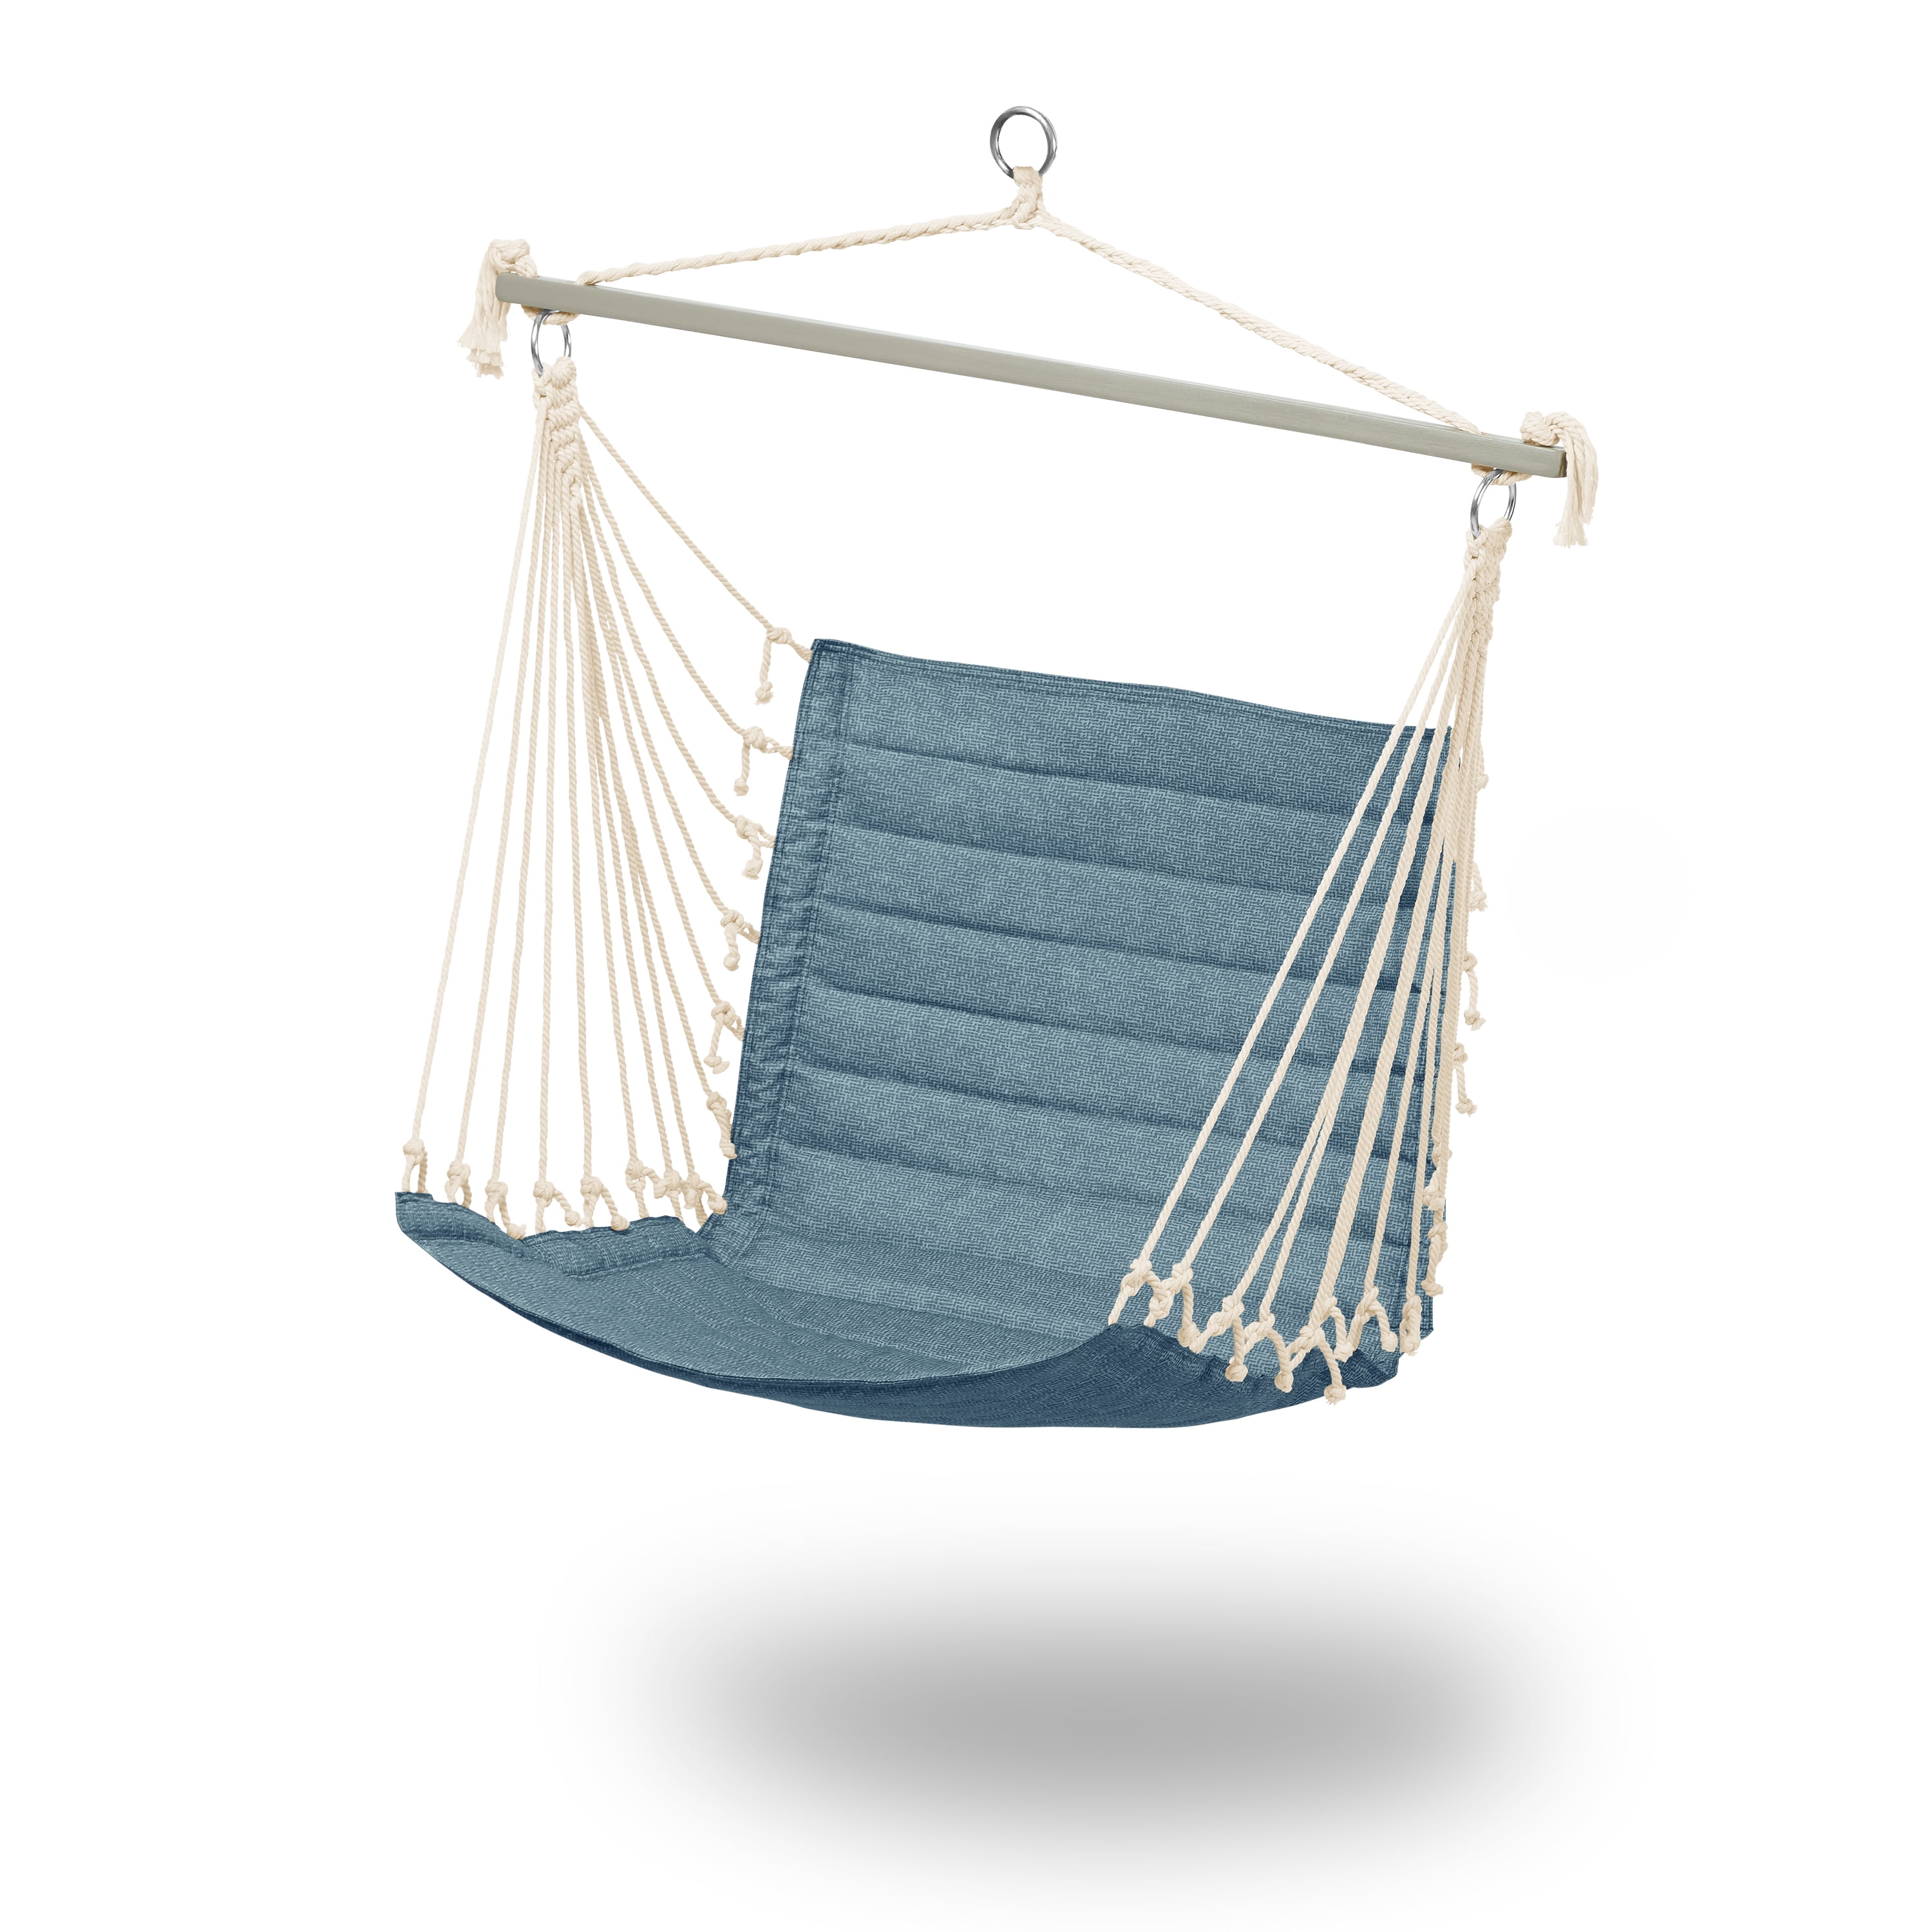 bubble fund Saucer Duck Covers Weekend 27 Inch Quilted Hammock Chair, Blue Shadow - Walmart.com